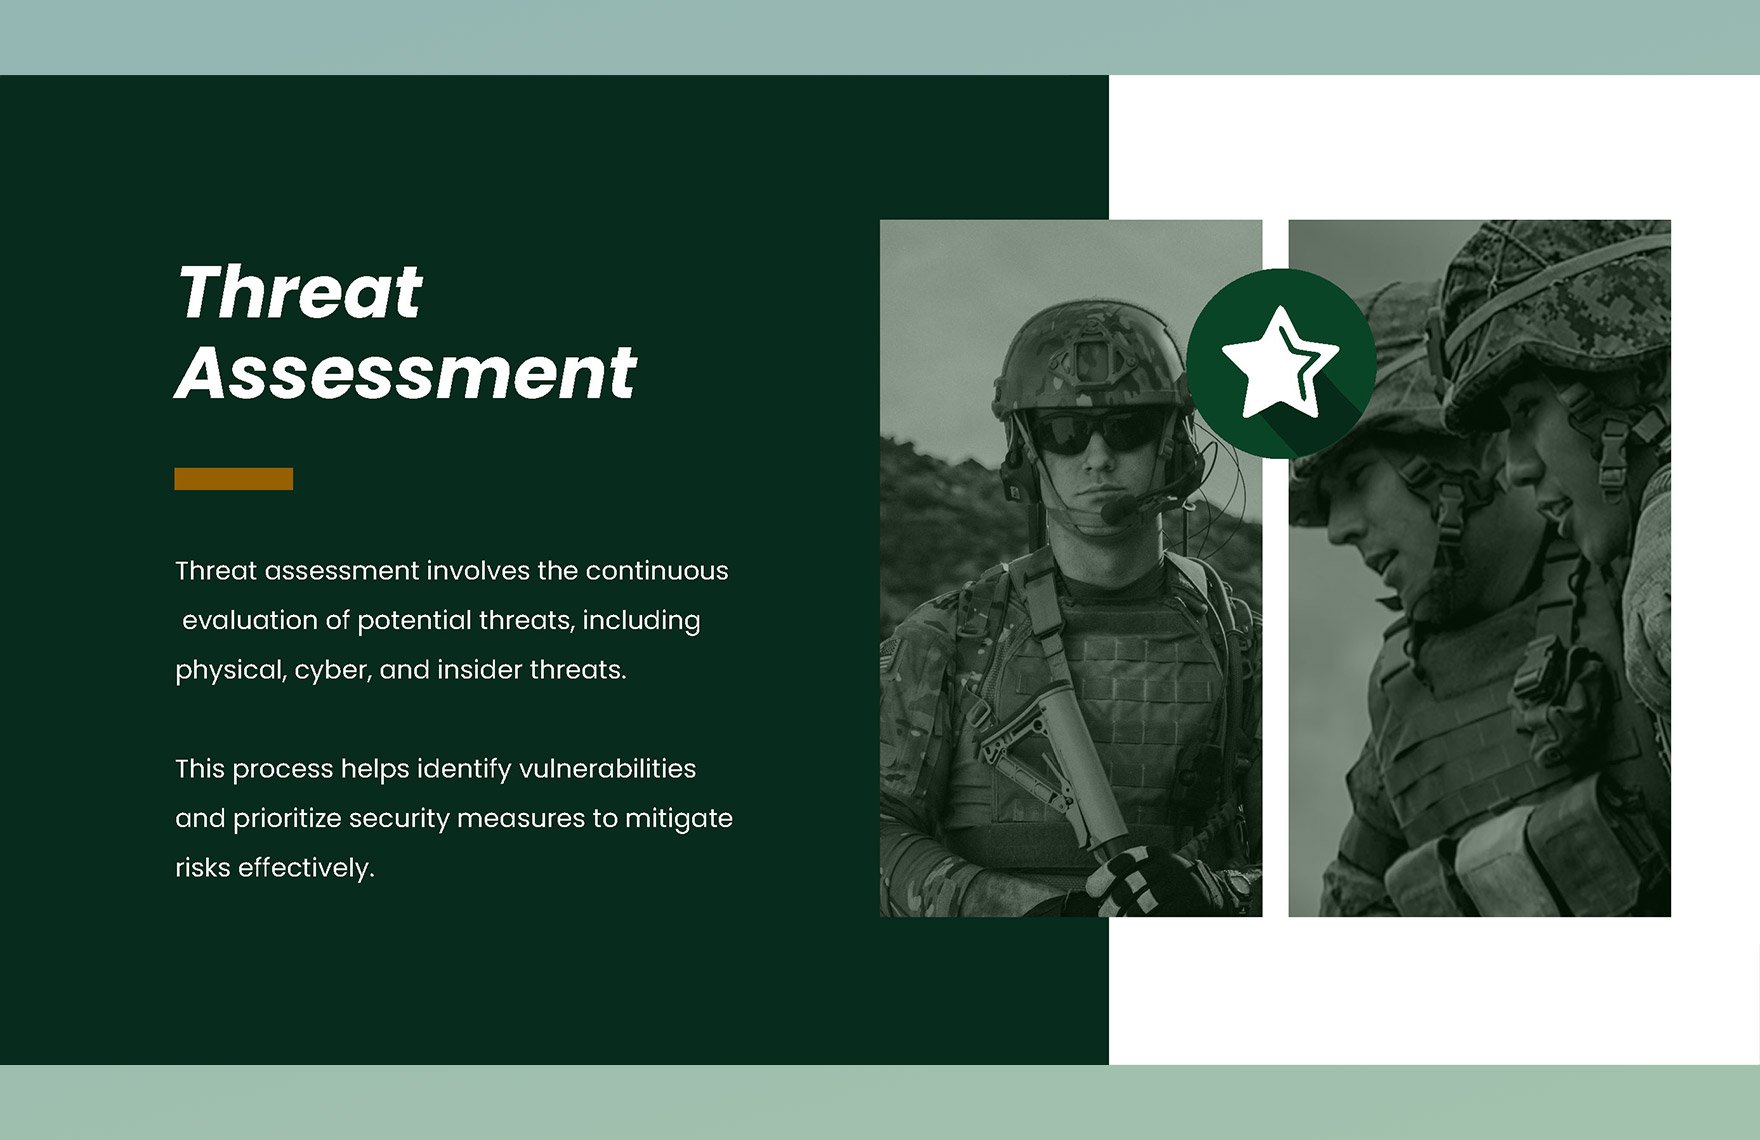 Army Base Defense Operations PPT Template